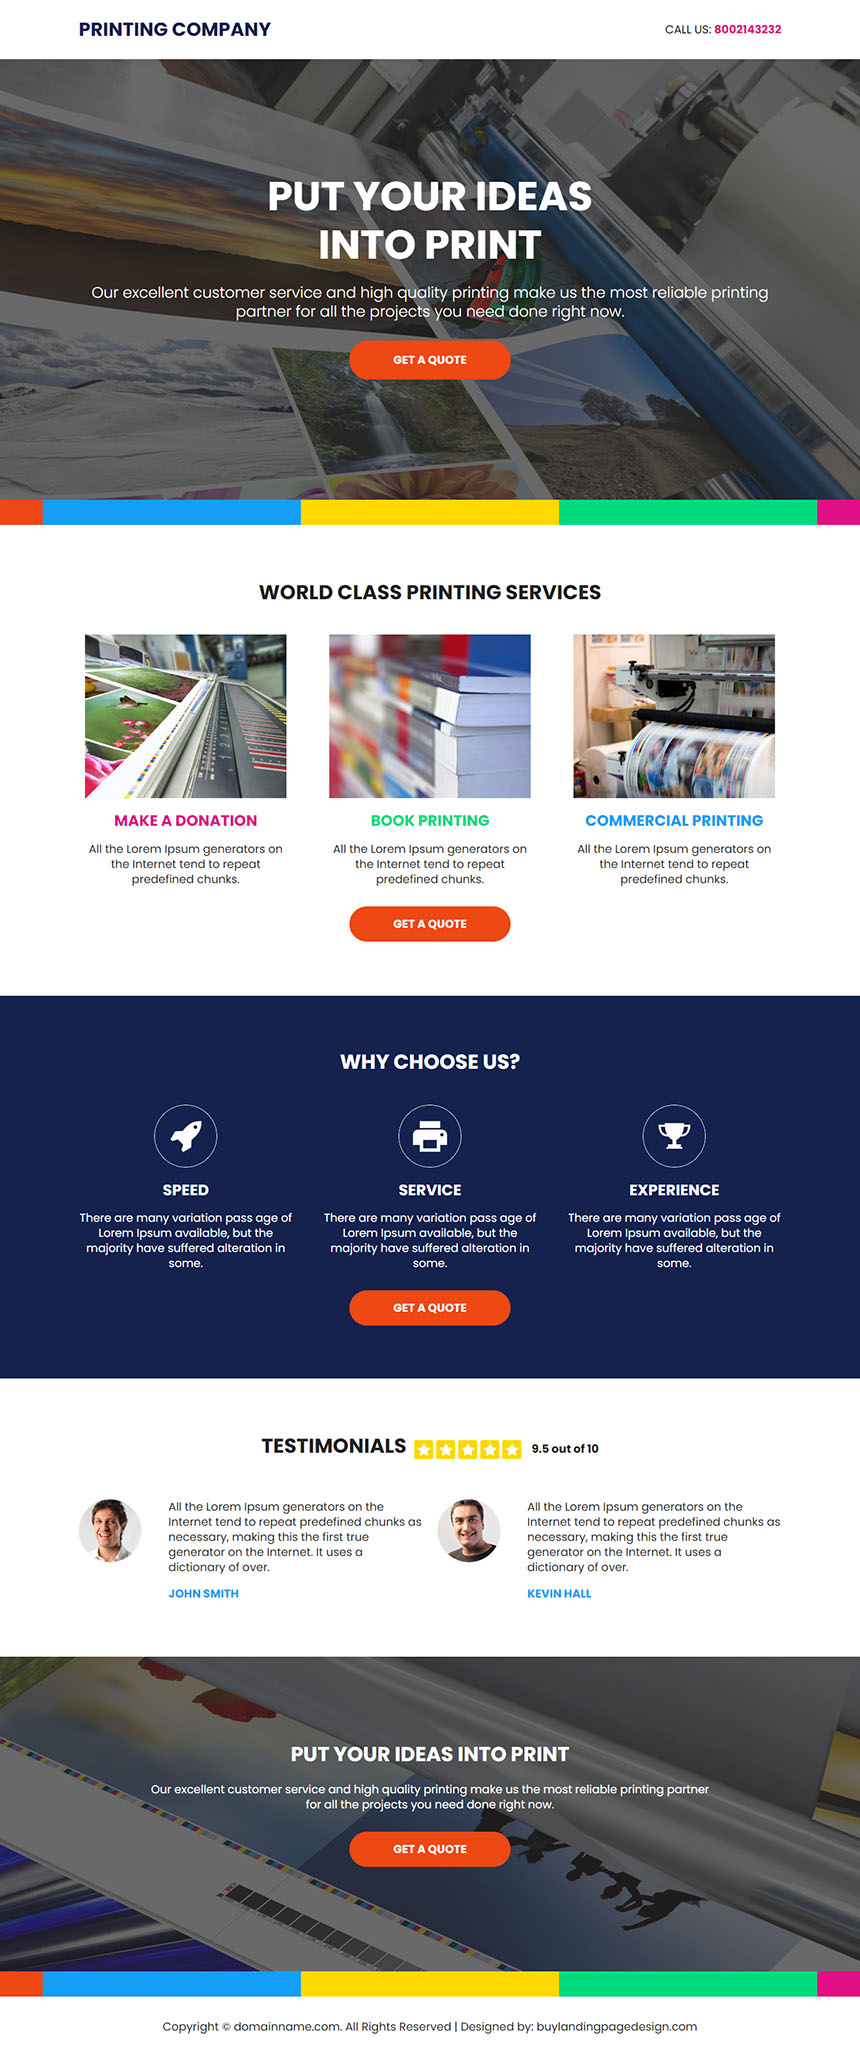 printing services lead capture responsive landing page